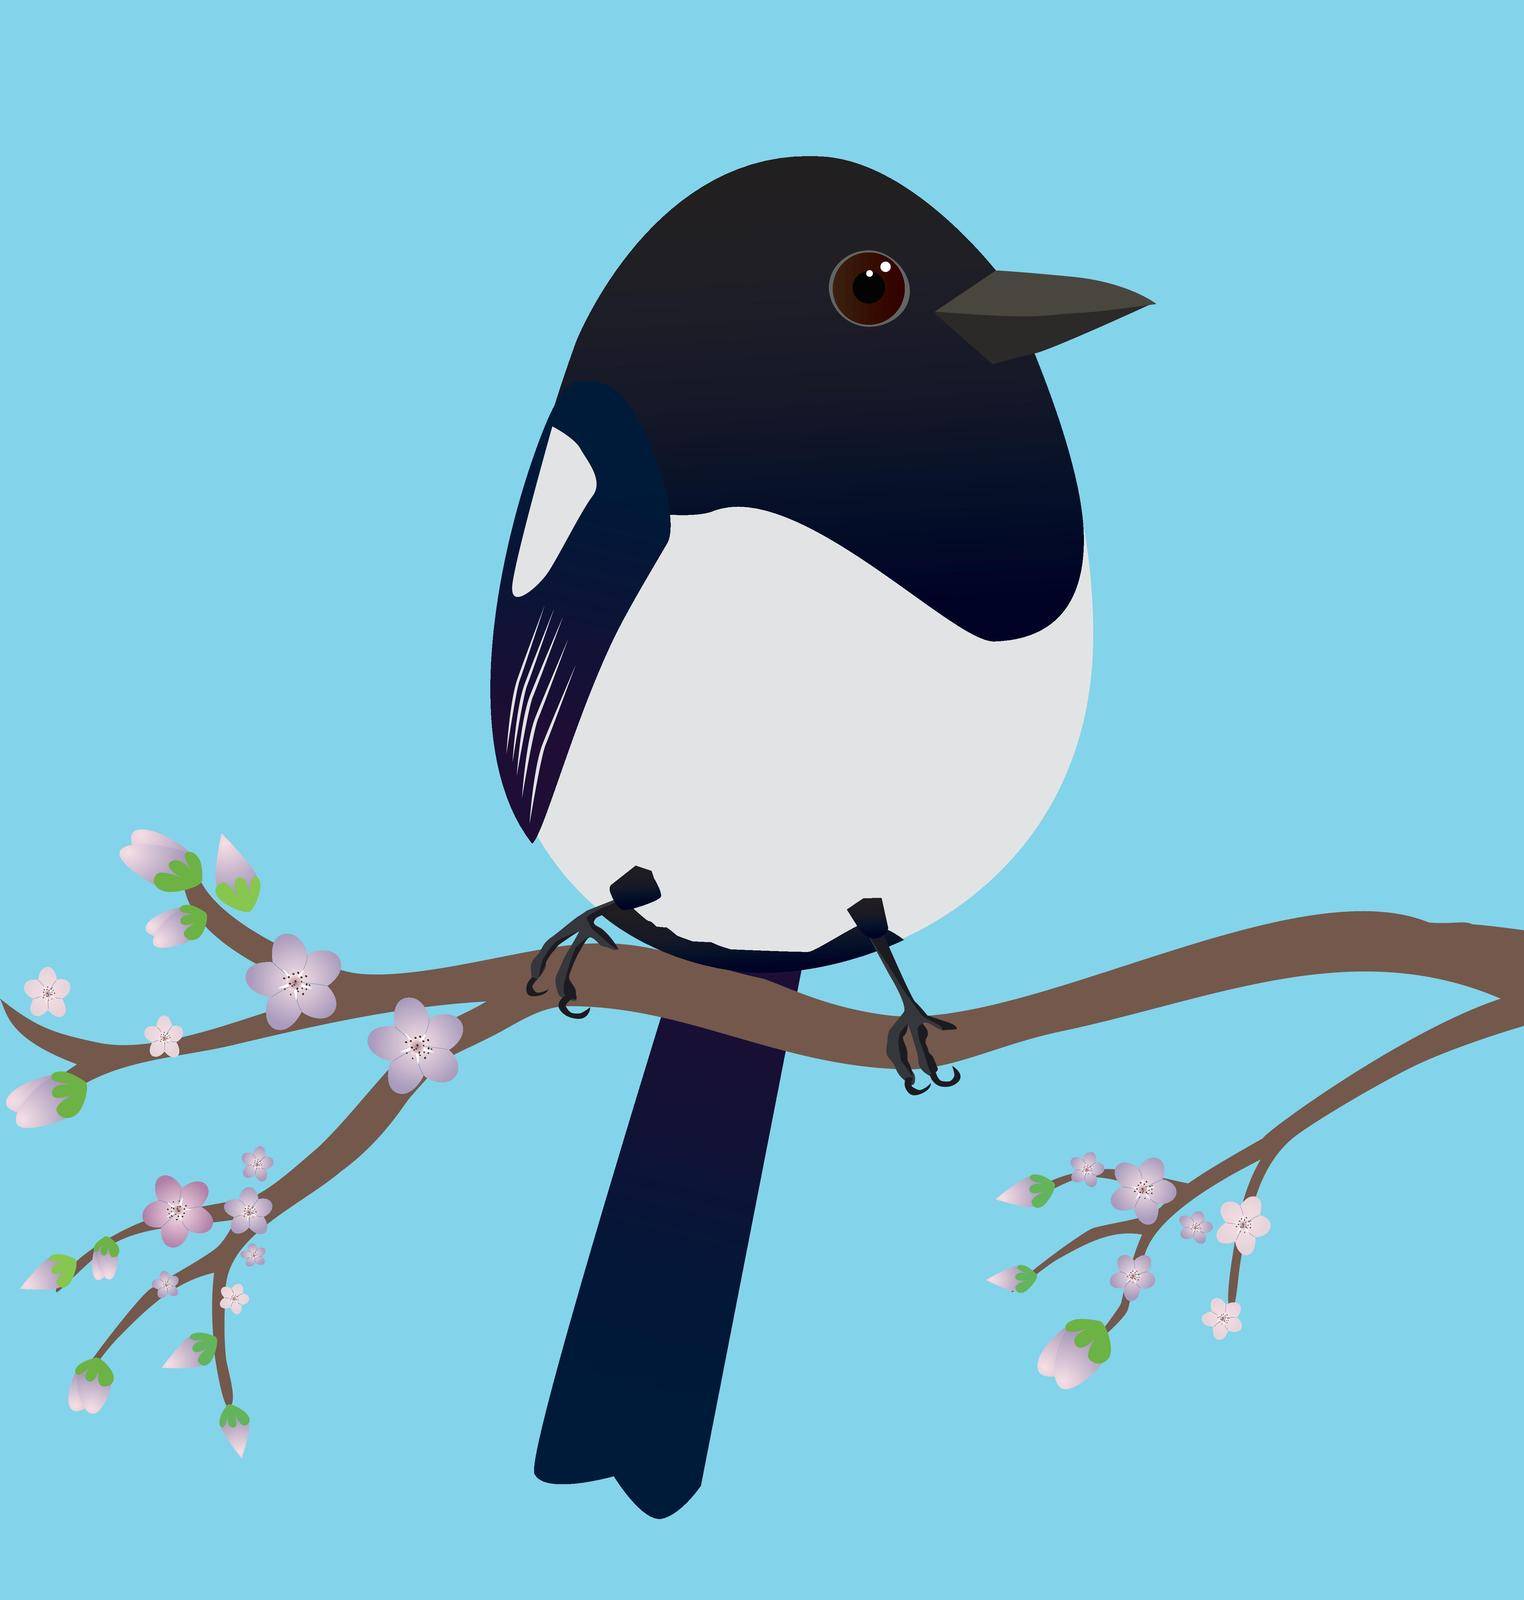 A very cute magpie bird in the shape of an egg. Blue background. The bird sits on a branch with blossom.